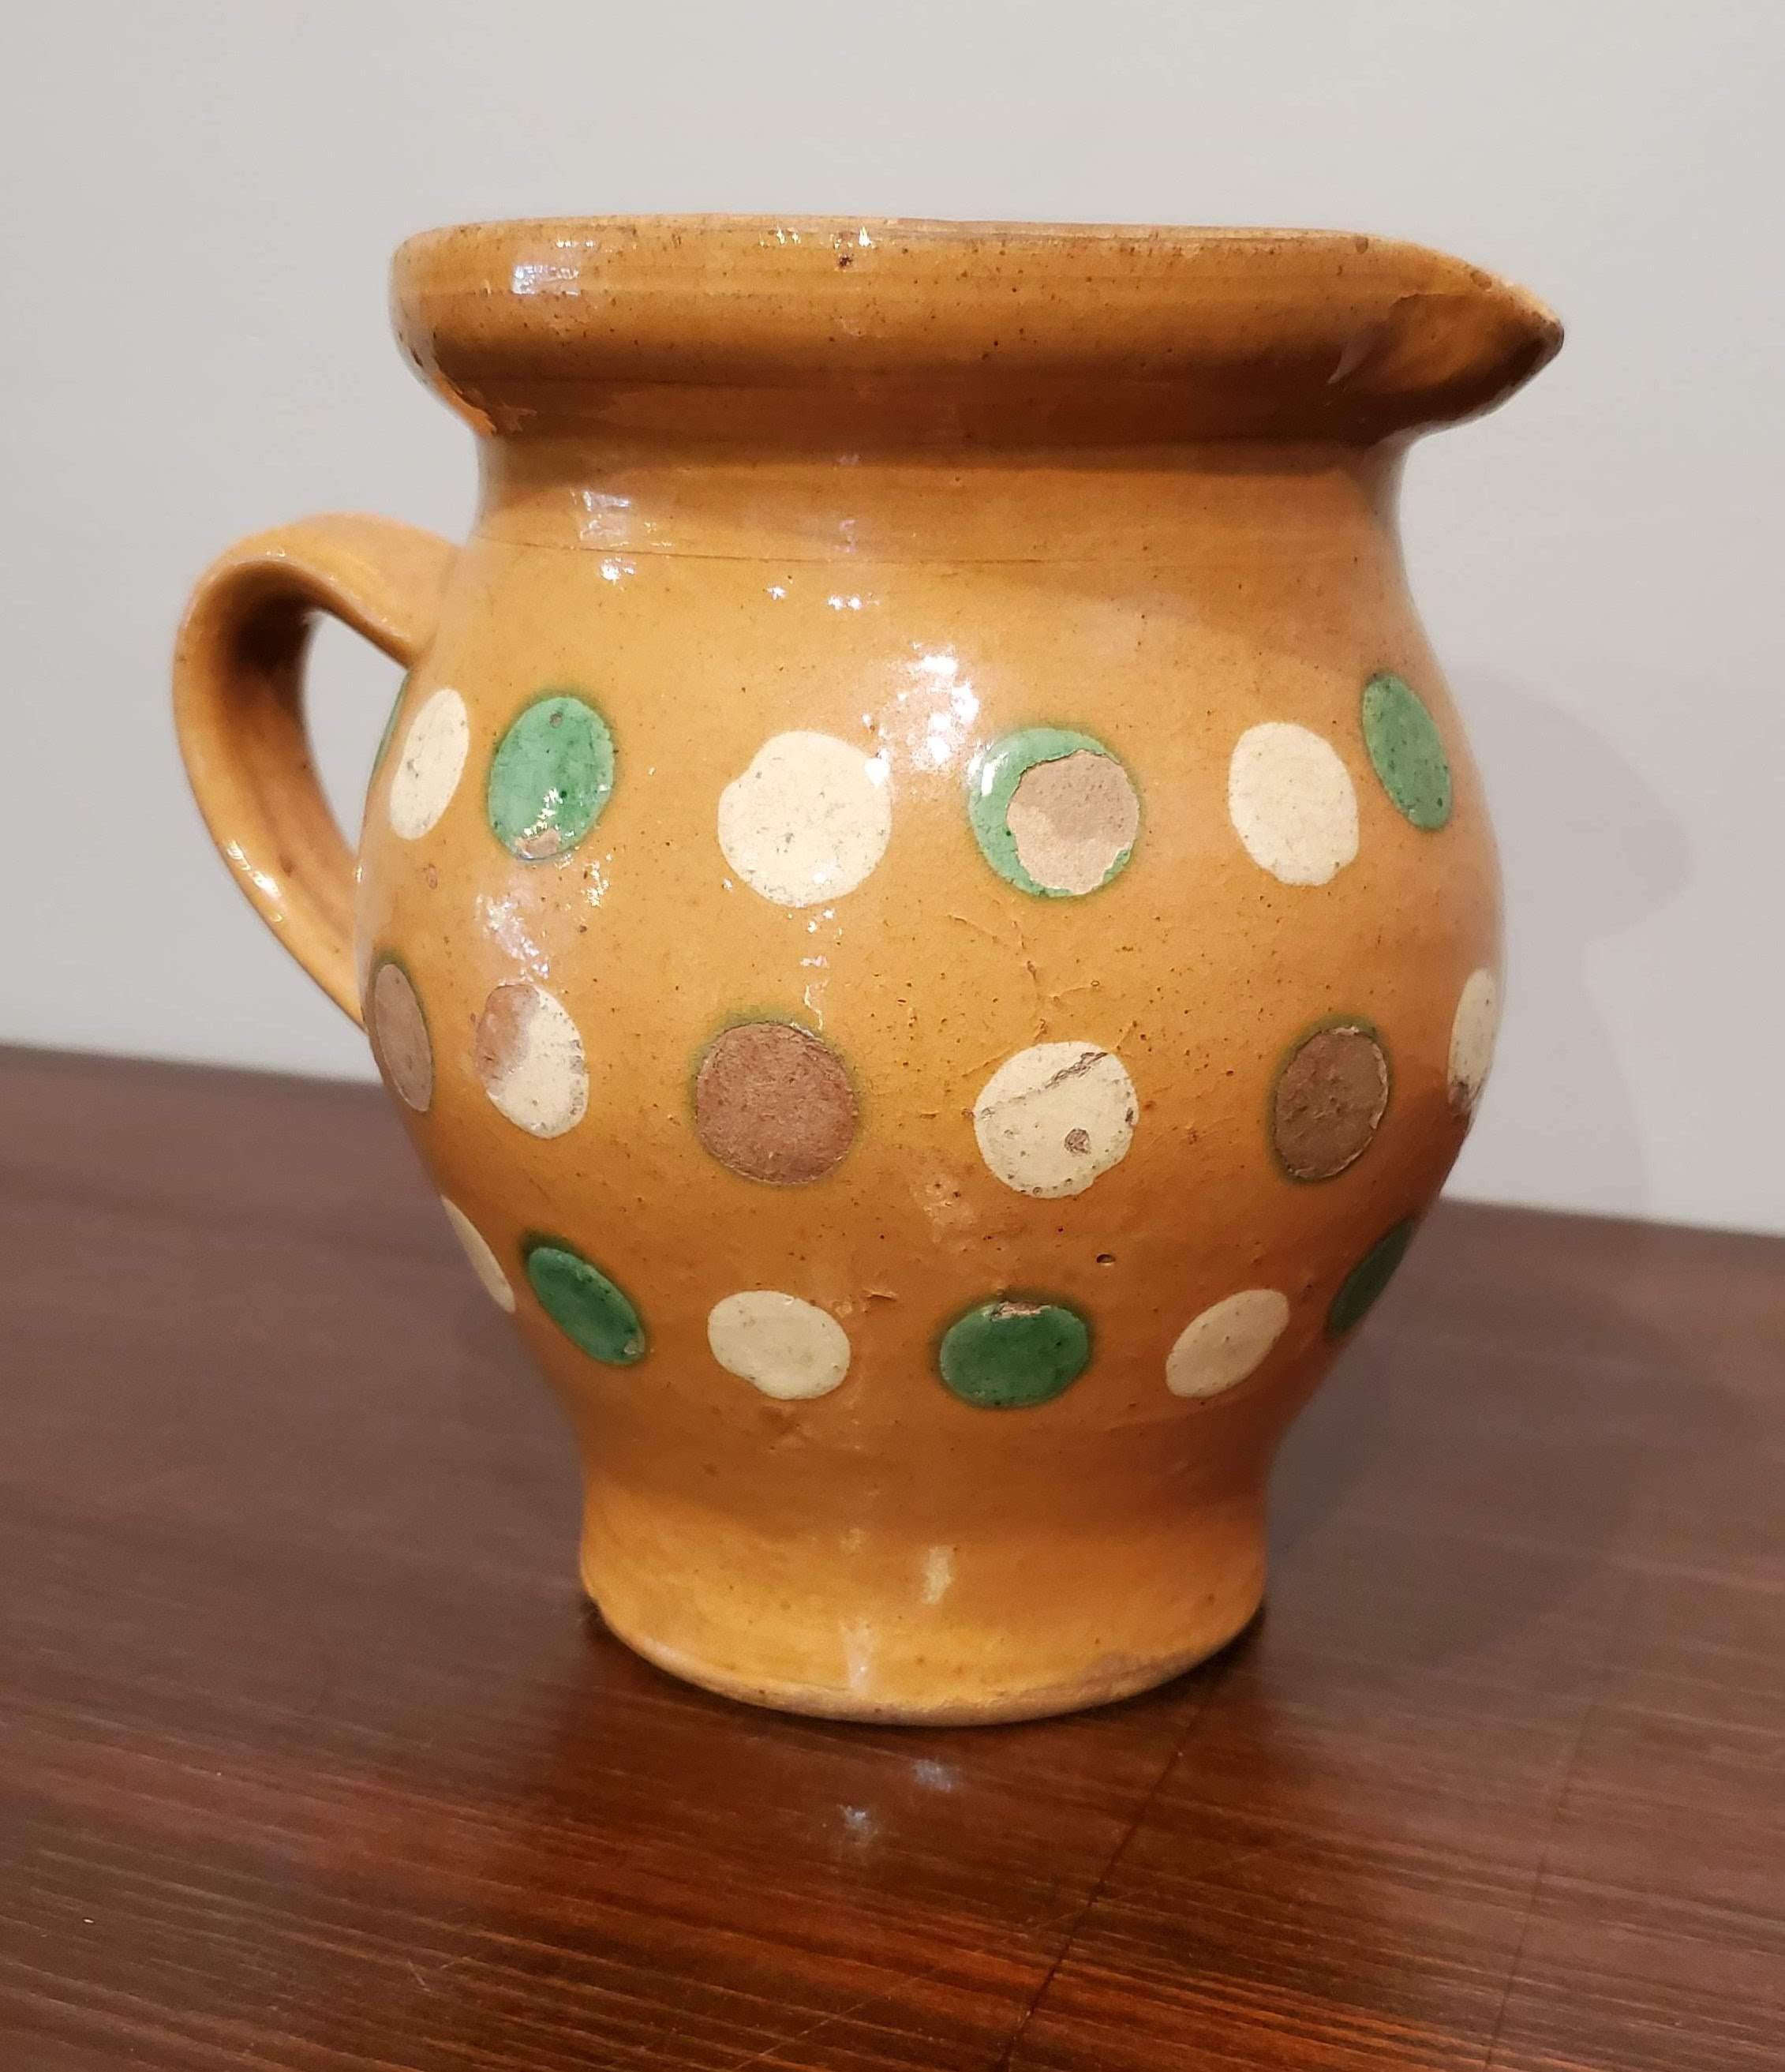 French provincial terracotta milk jug with green and cream polka dot decoration on an ochre ground. Adorable for decoration or for use in your modern kitchen,
Alsace, circa 1870
Measures: 5.5” H, 6.5” W, 4.25” D.
 